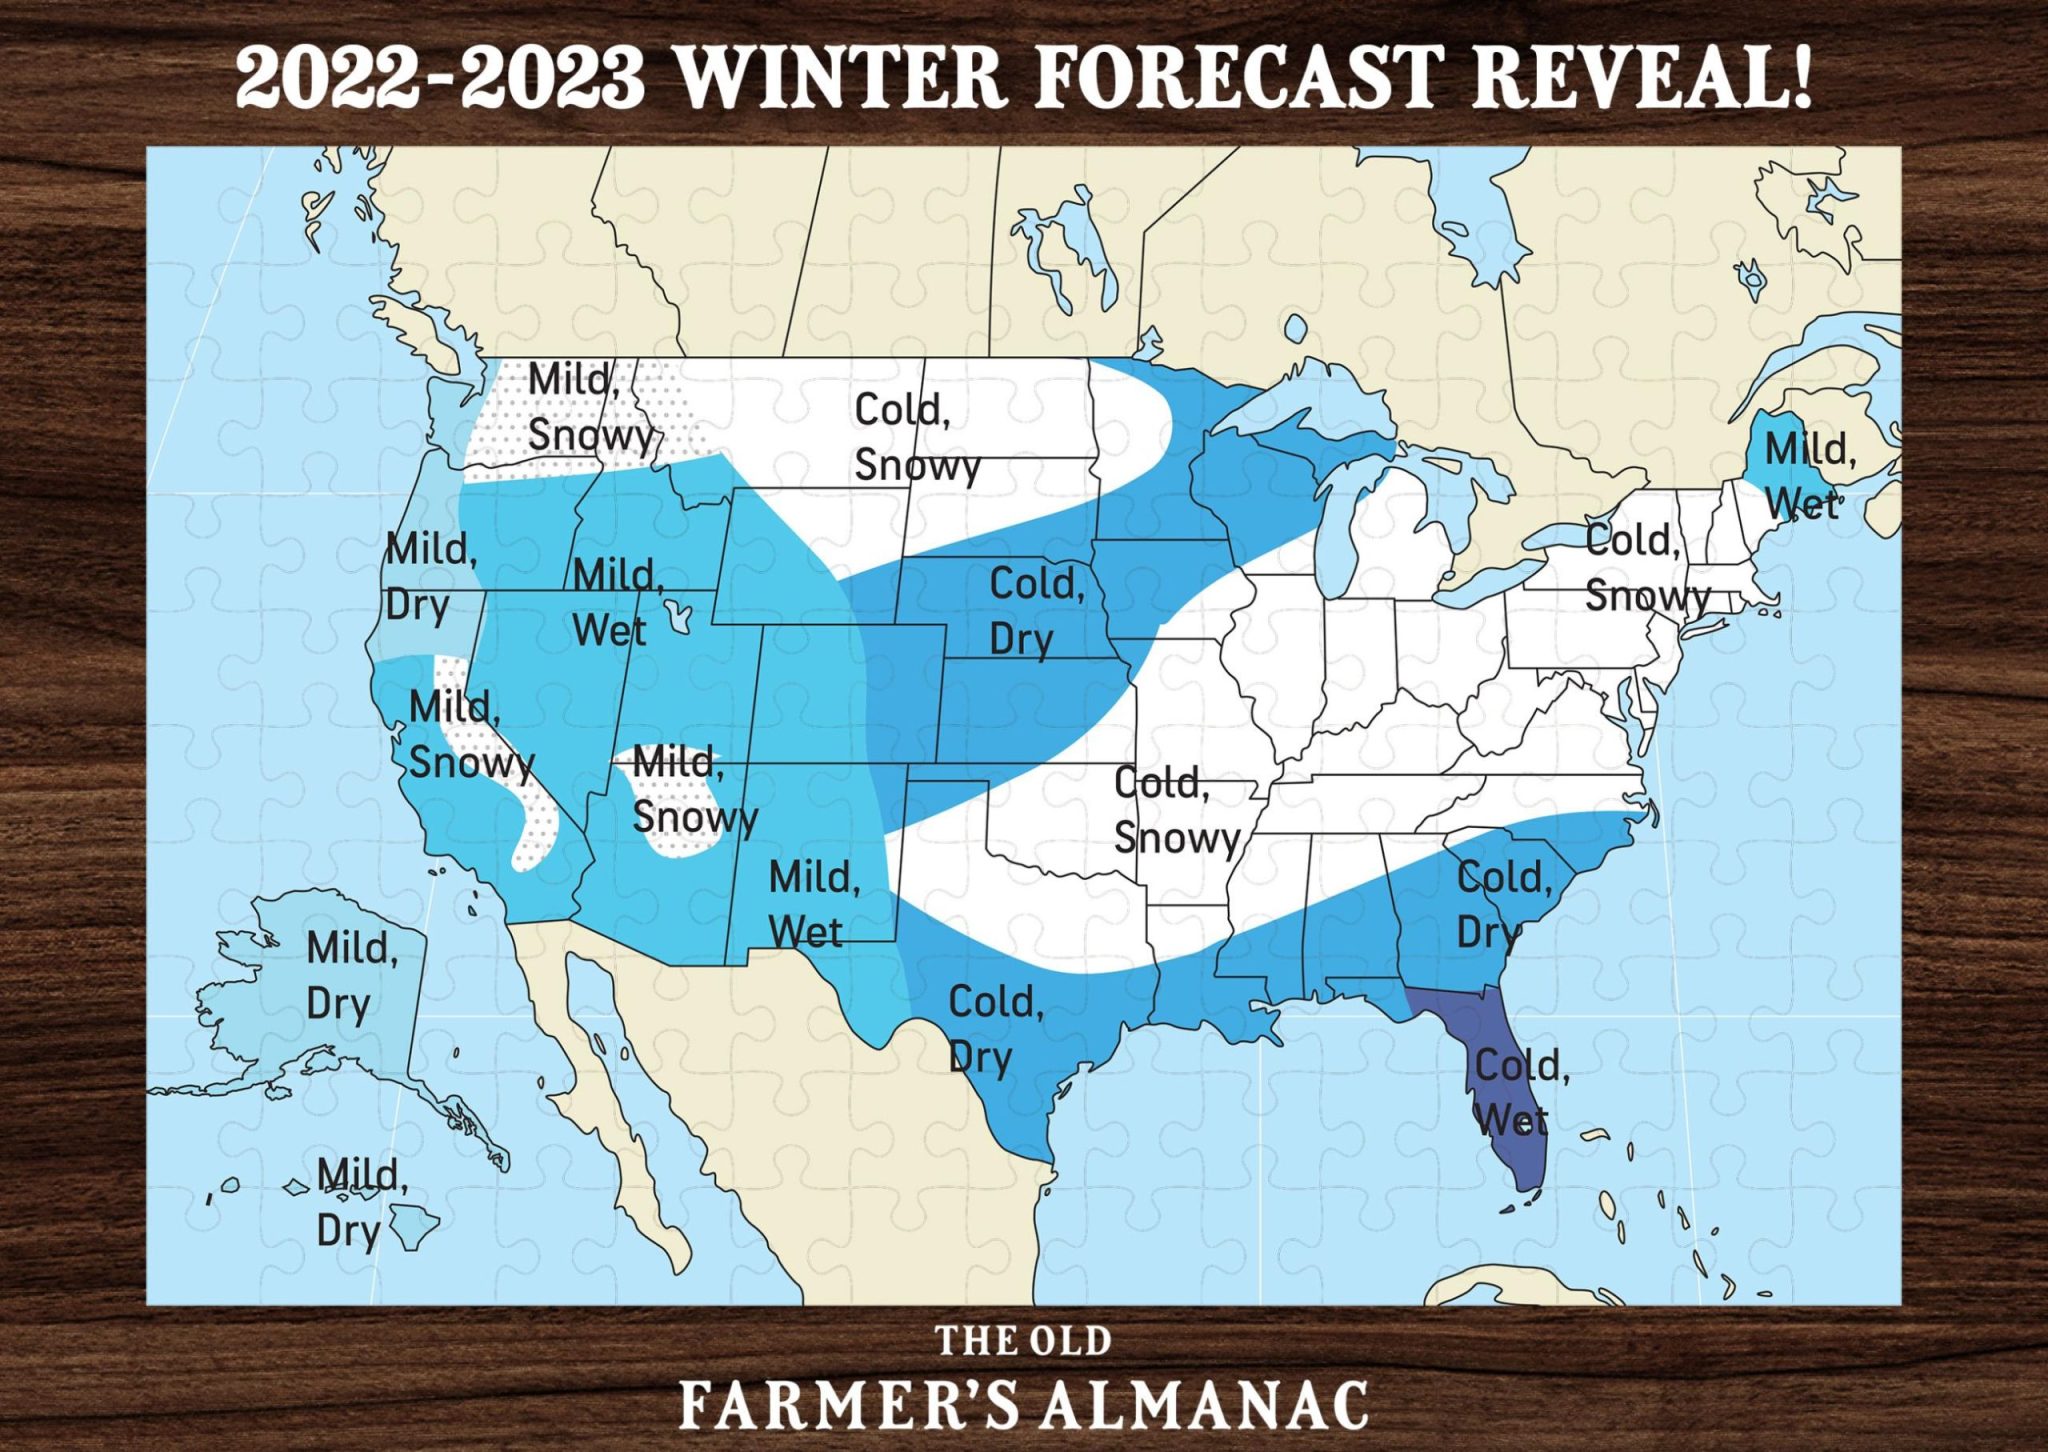 Bighorn Basin's Winter Forecast is Colder and Snowier?